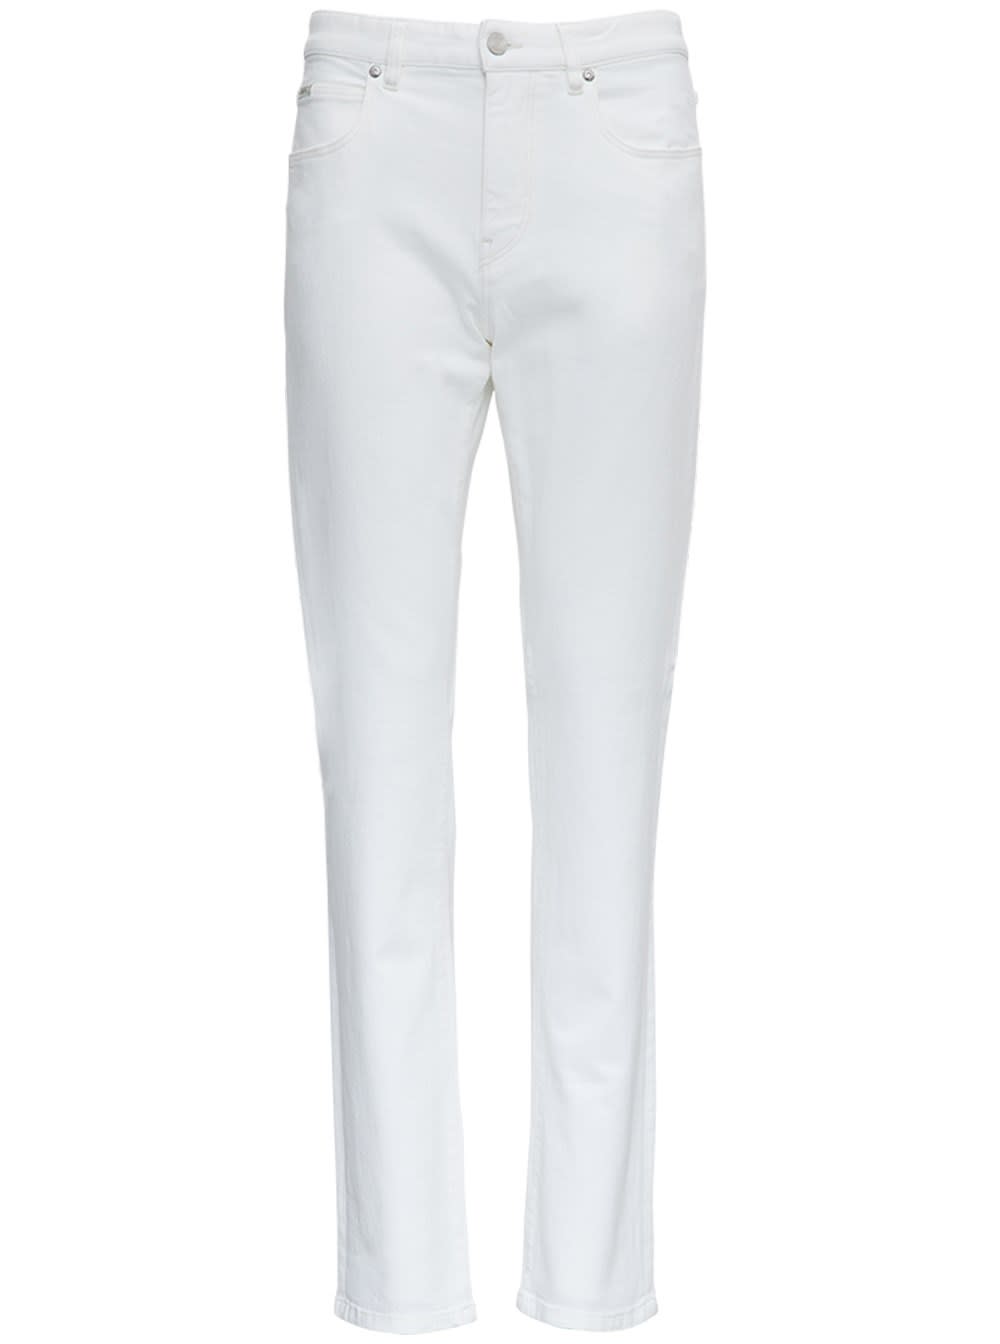 Z Zegna White Cotton Jeans With Five Pockets